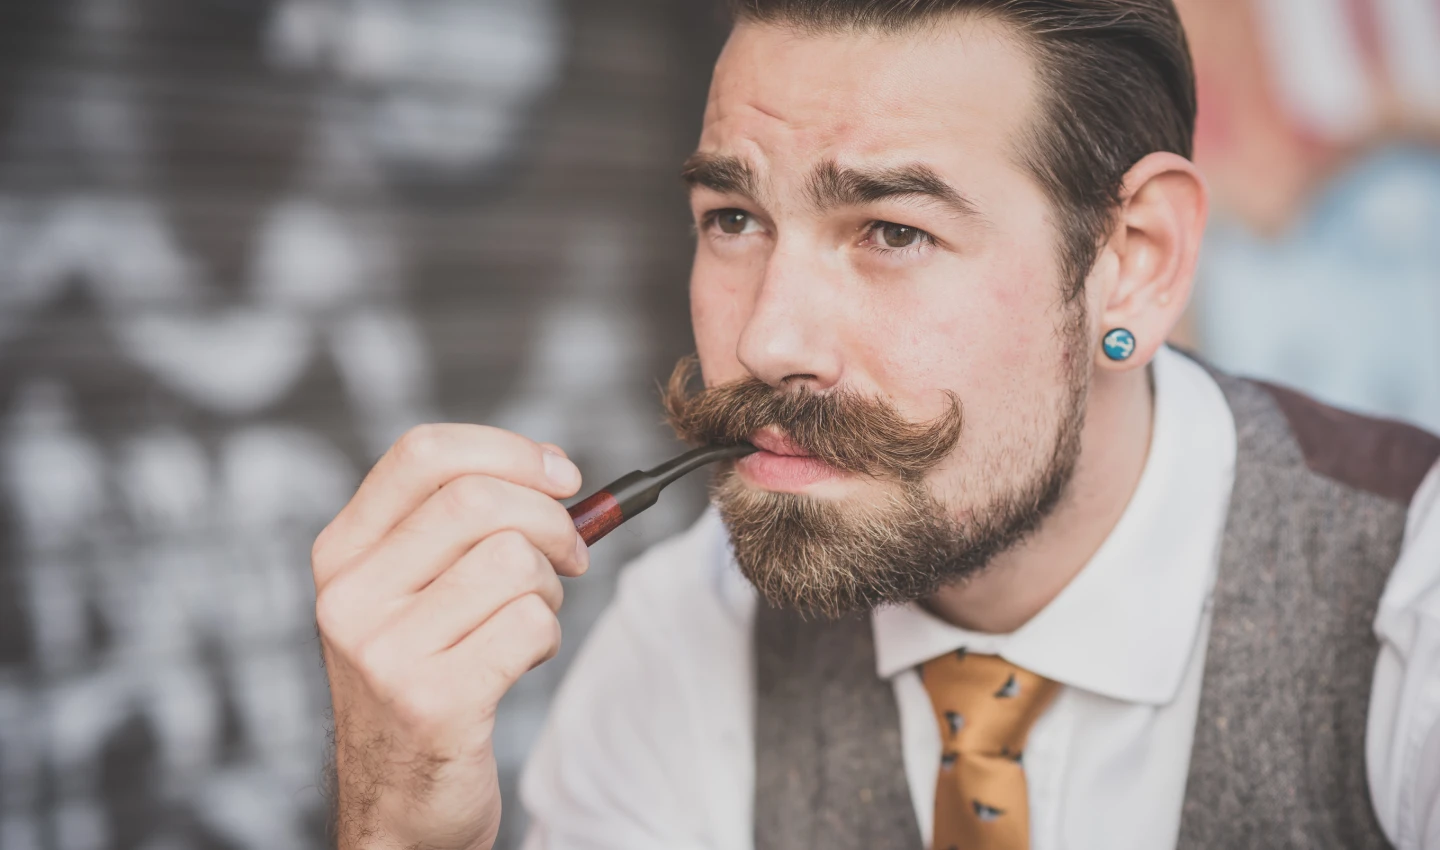 A man with a well-groomed mustache demonstrates proper grooming techniques in this image about mustache grooming tips for men.